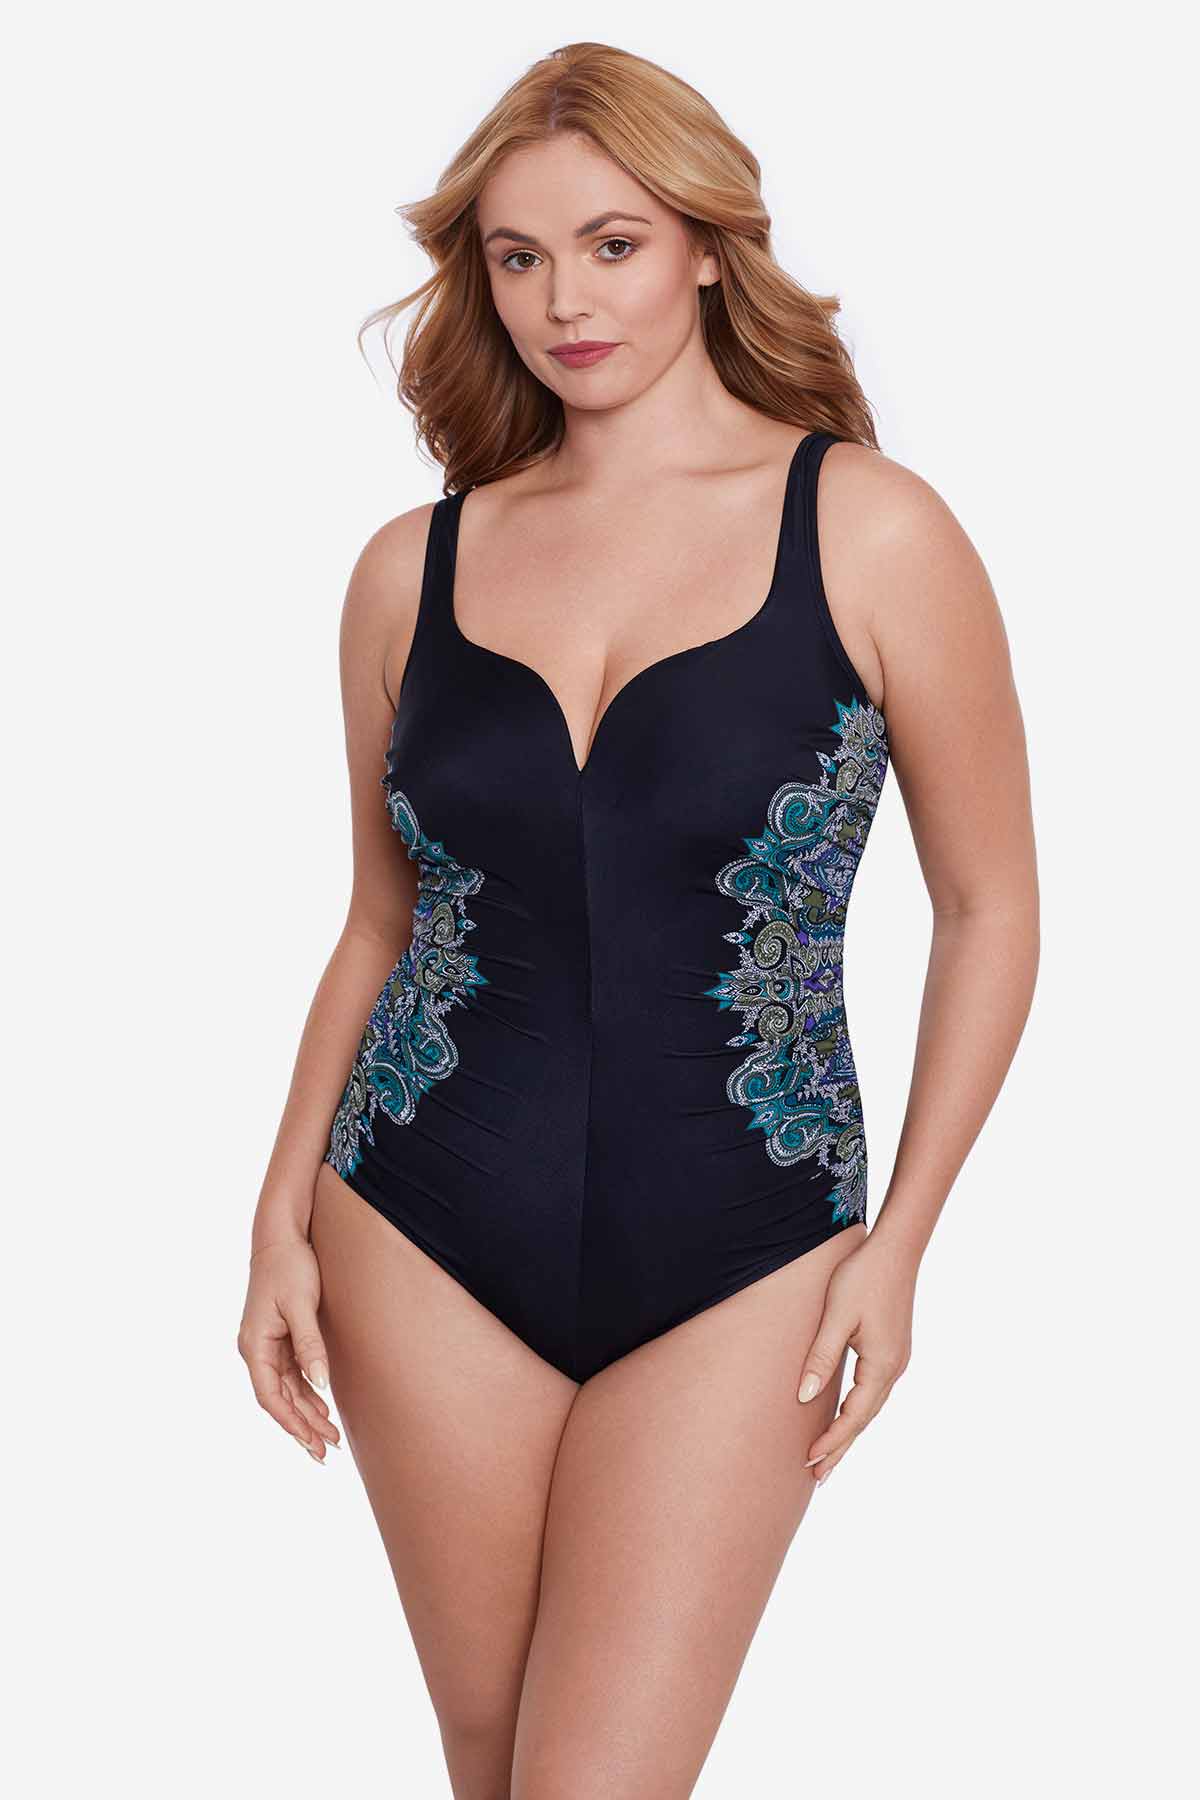 MiracleSuit Dreamsuit by miracle brands black high waist bikini bottom NWT  Size 14 - $30 New With Tags - From Candice